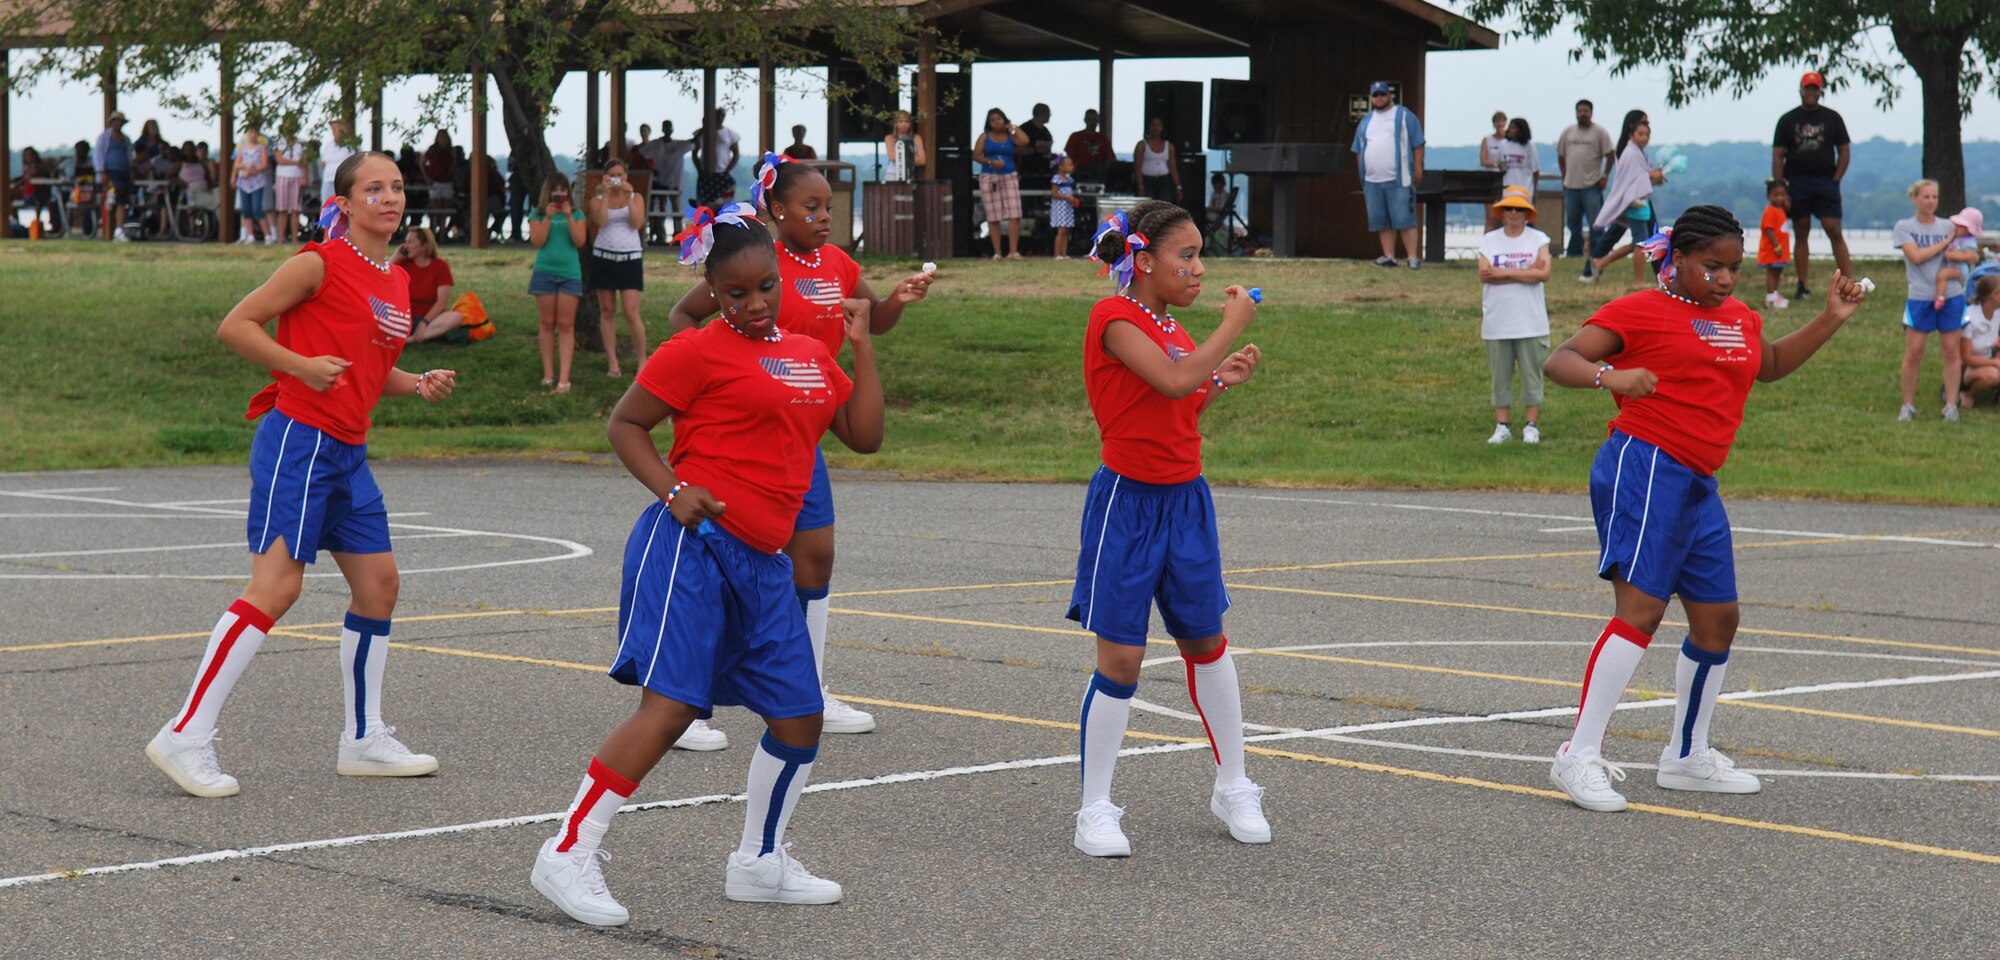 The Bollingettes perform at dance routine July 4 during the 6th Annual Freedom Fest at Bolling Green Park. (U.S. Air Force photo by Senior Airman Edward Carr)